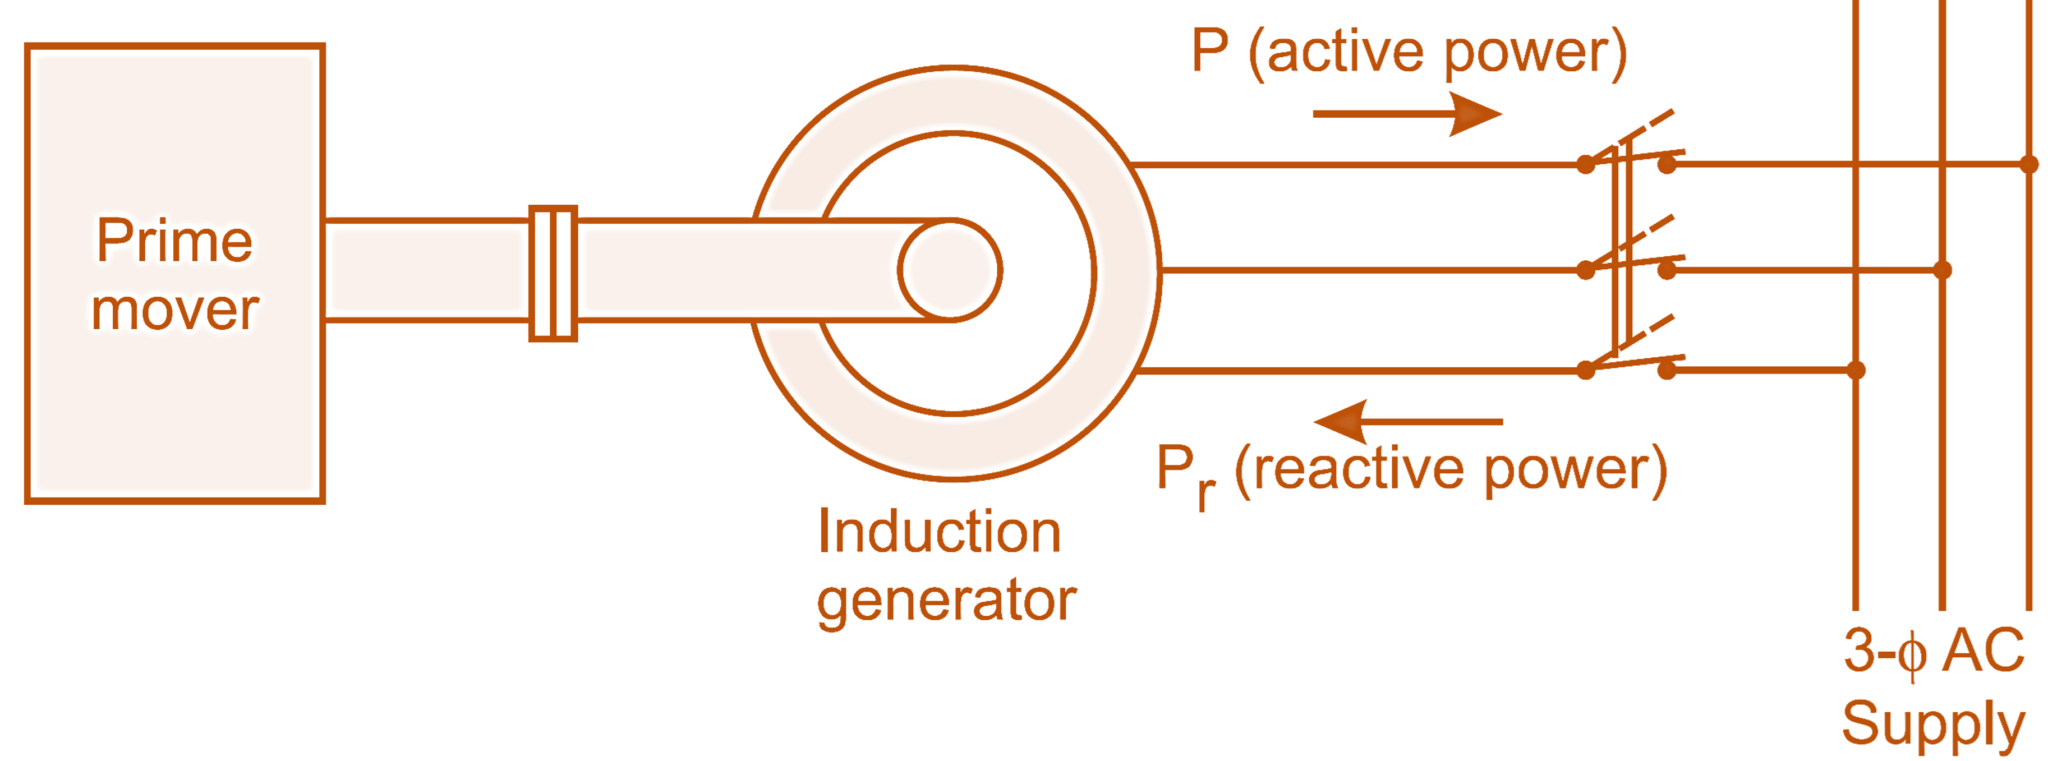 Induction machine working as Induction Generator